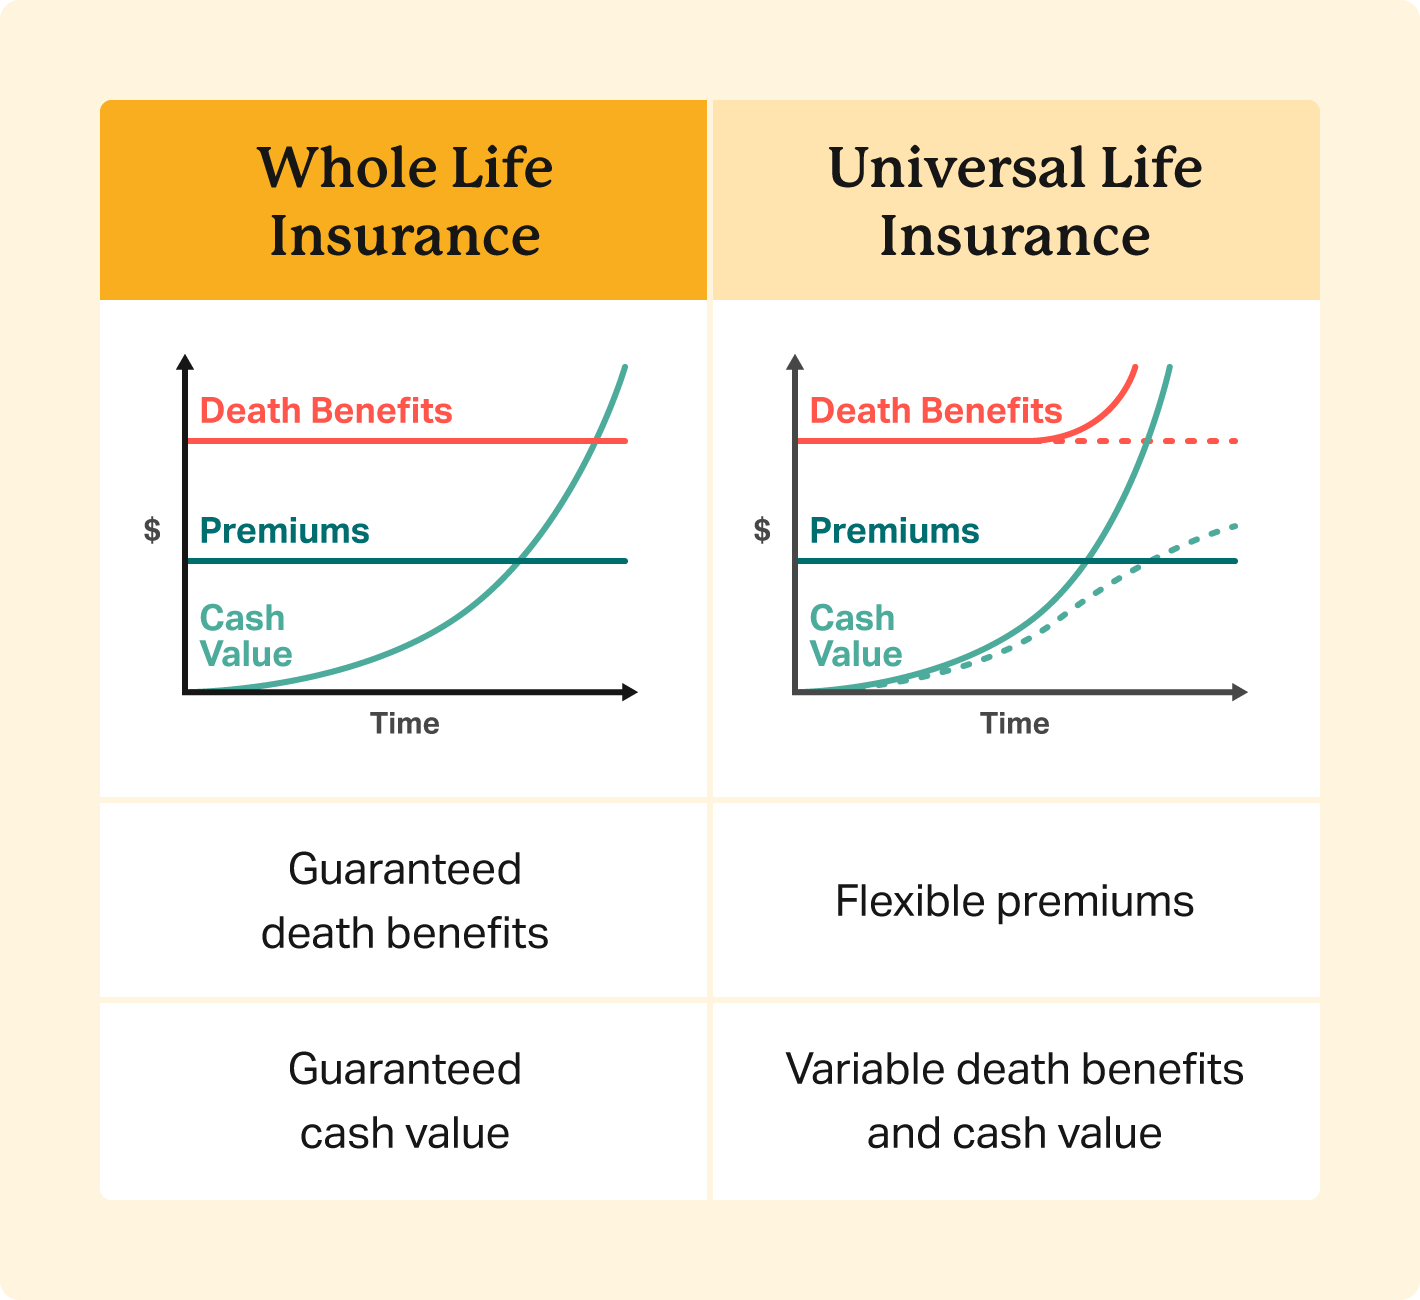 A chart visually represents the differences in premiums, death benefits, and cash value of whole and universal life insurance.